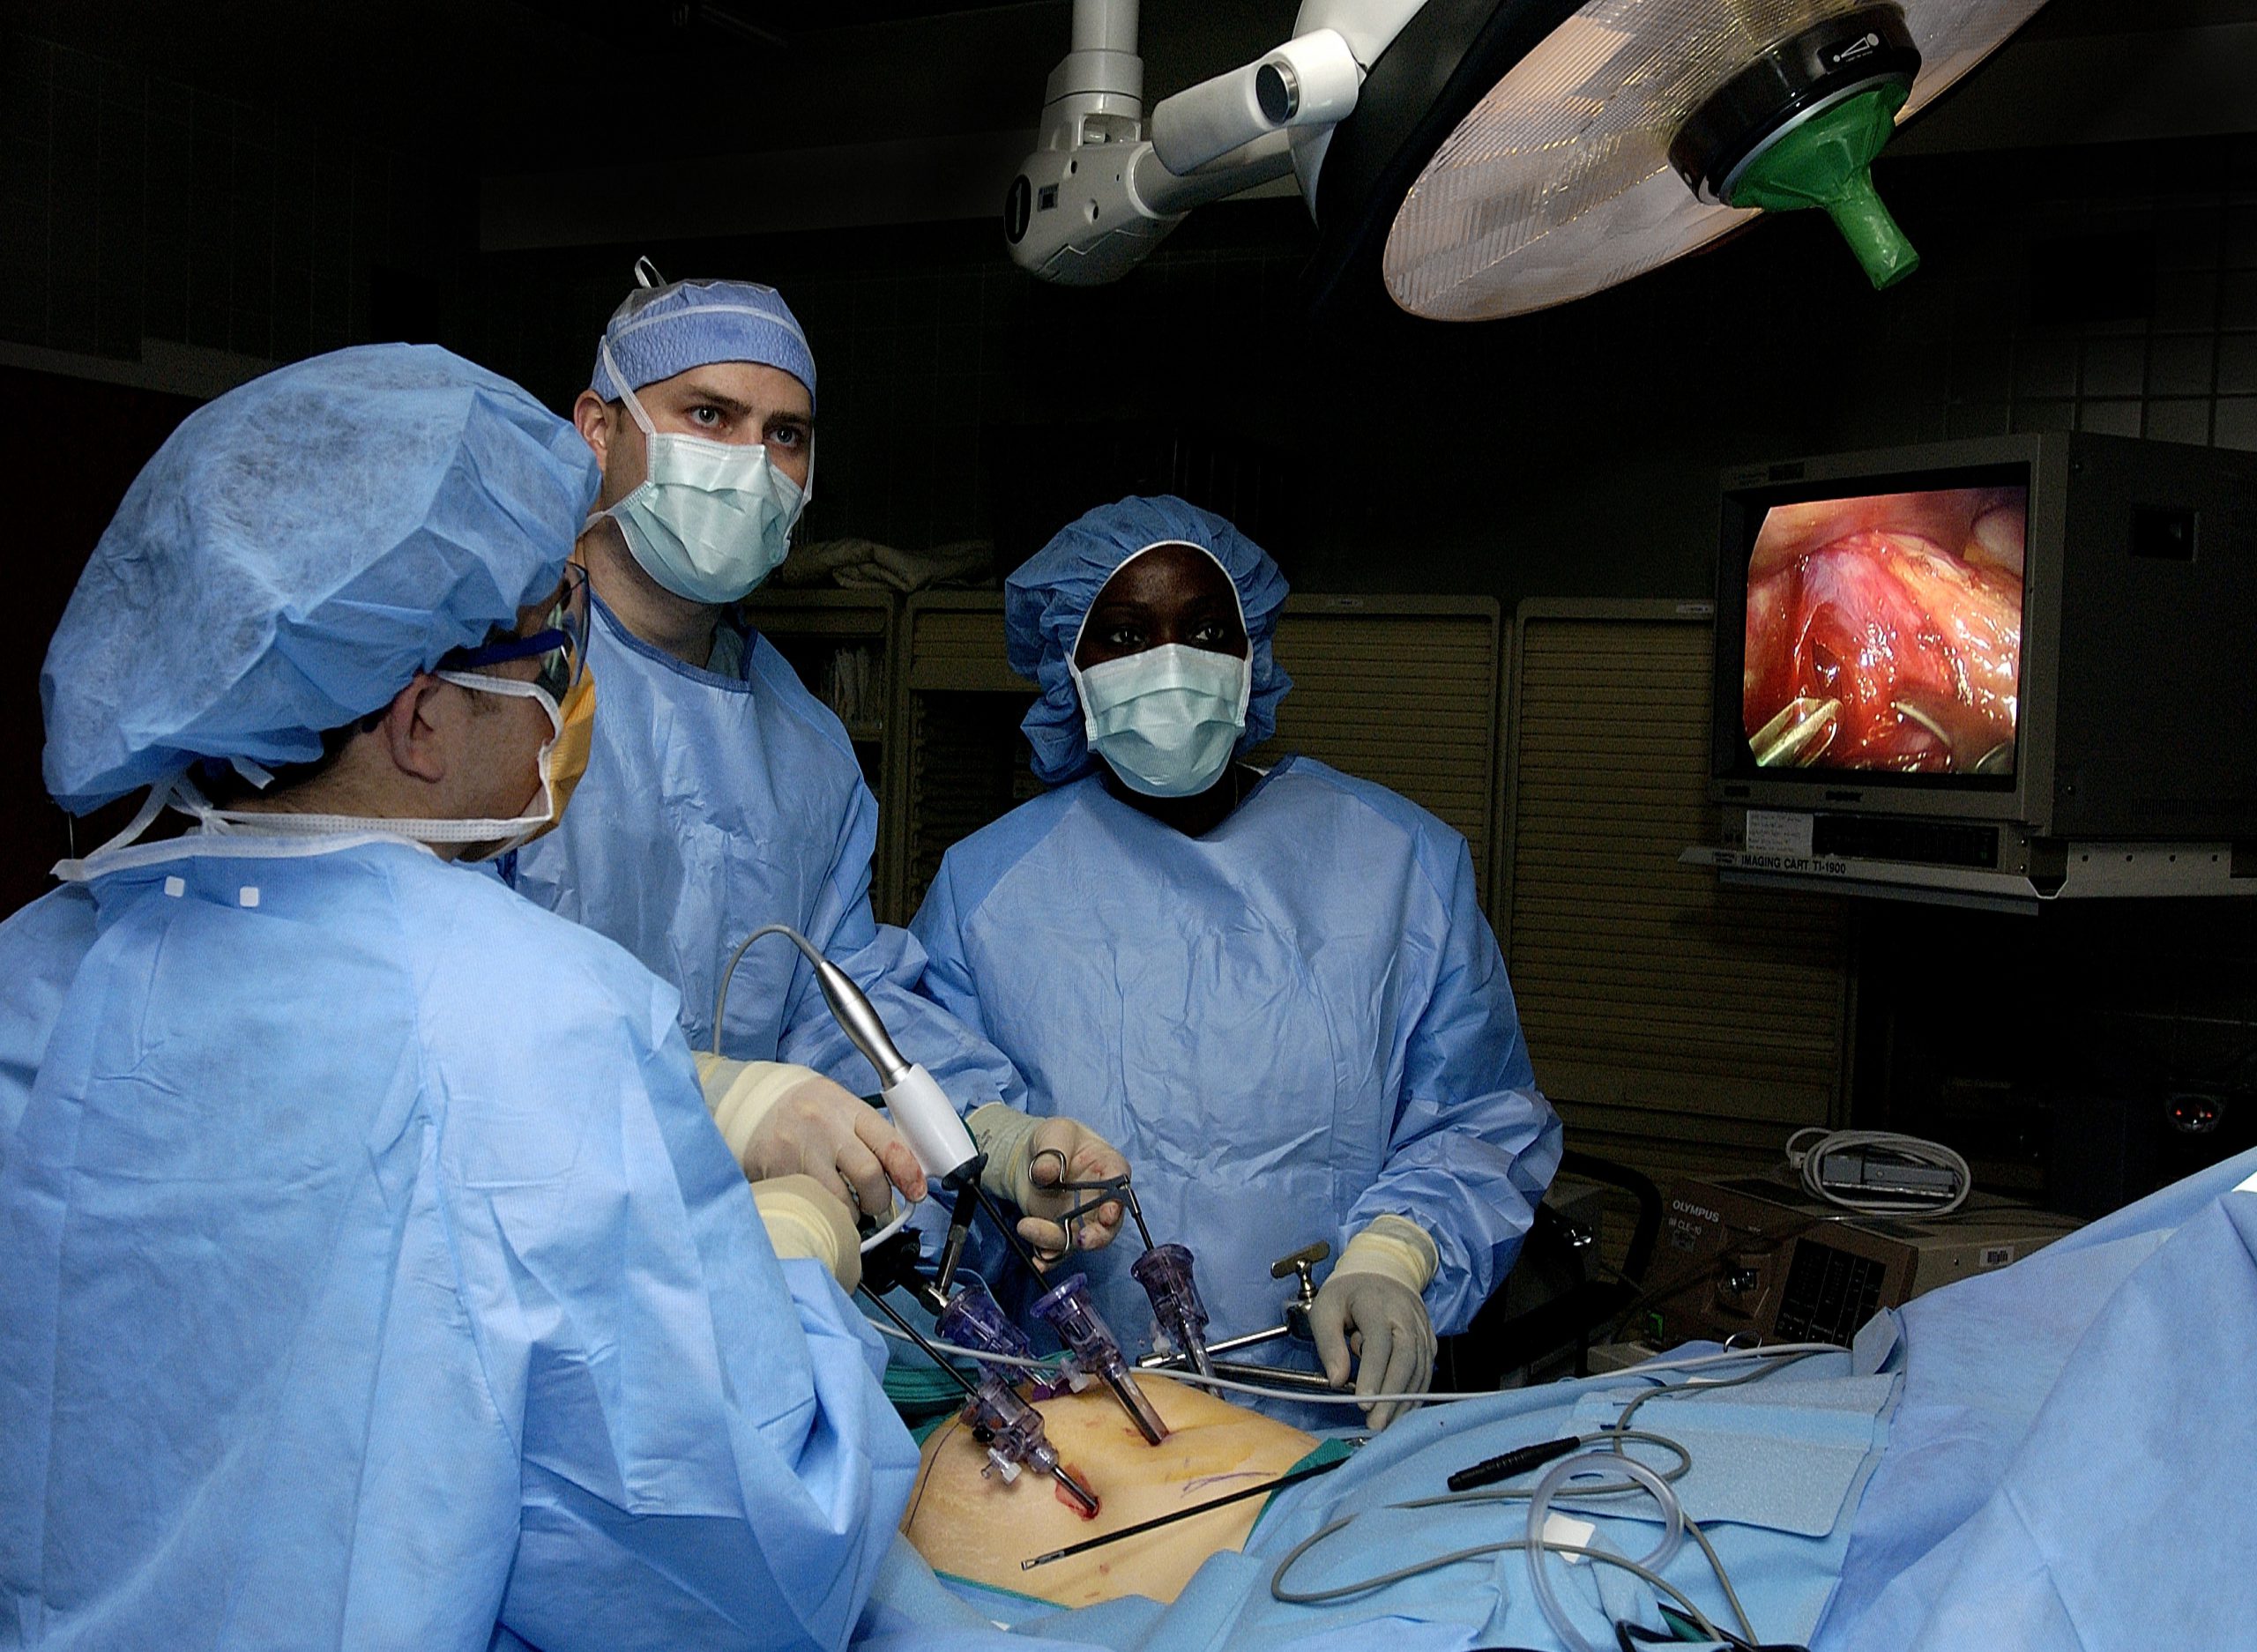 050131-F-1936B-008Doctors Ronald Post (left) and John Smear (center) and Physician's Assistant Debra Blackshire perform laparoscopic stomach surgery at Langley Air Force Base, Va., on Jan. 31, 2005.  The surgery will involve the removal of the gall bladder to help alleviate acid reflux disease.  DoD photo by Staff Sgt. Samuel Bendet, U.S. Air Force.  (Released)